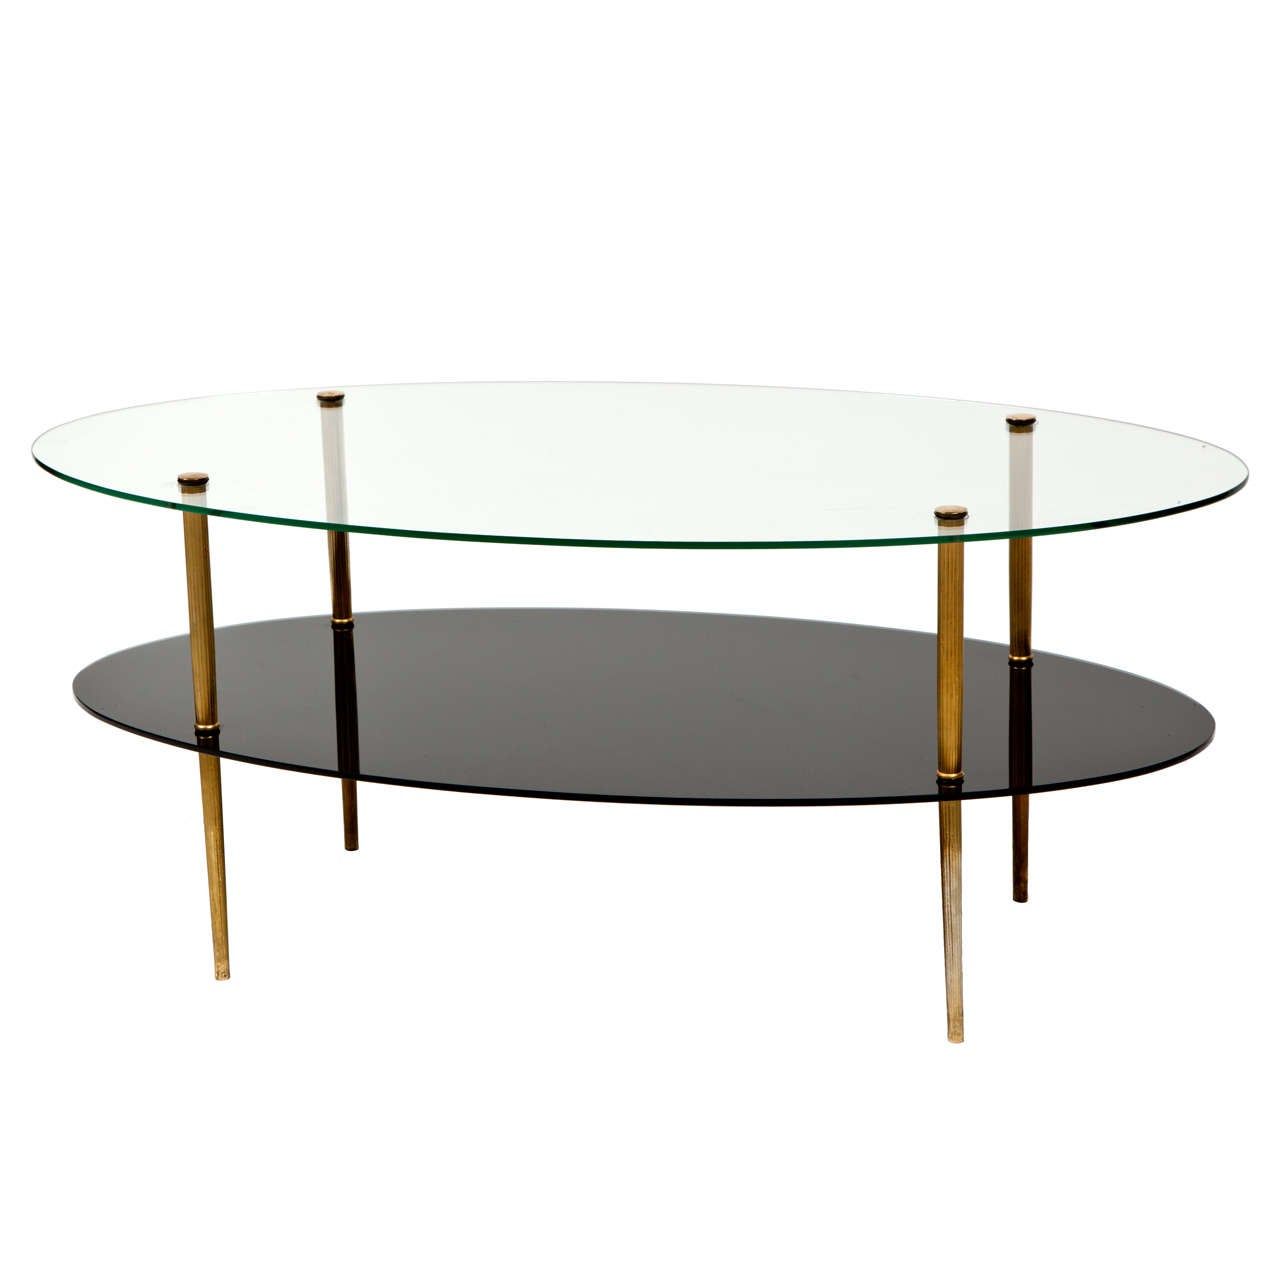 Well Known Oval Glass Two Tier Coffee Table At 1stdibs Throughout Glass And Pewter Oval Coffee Tables (View 3 of 10)